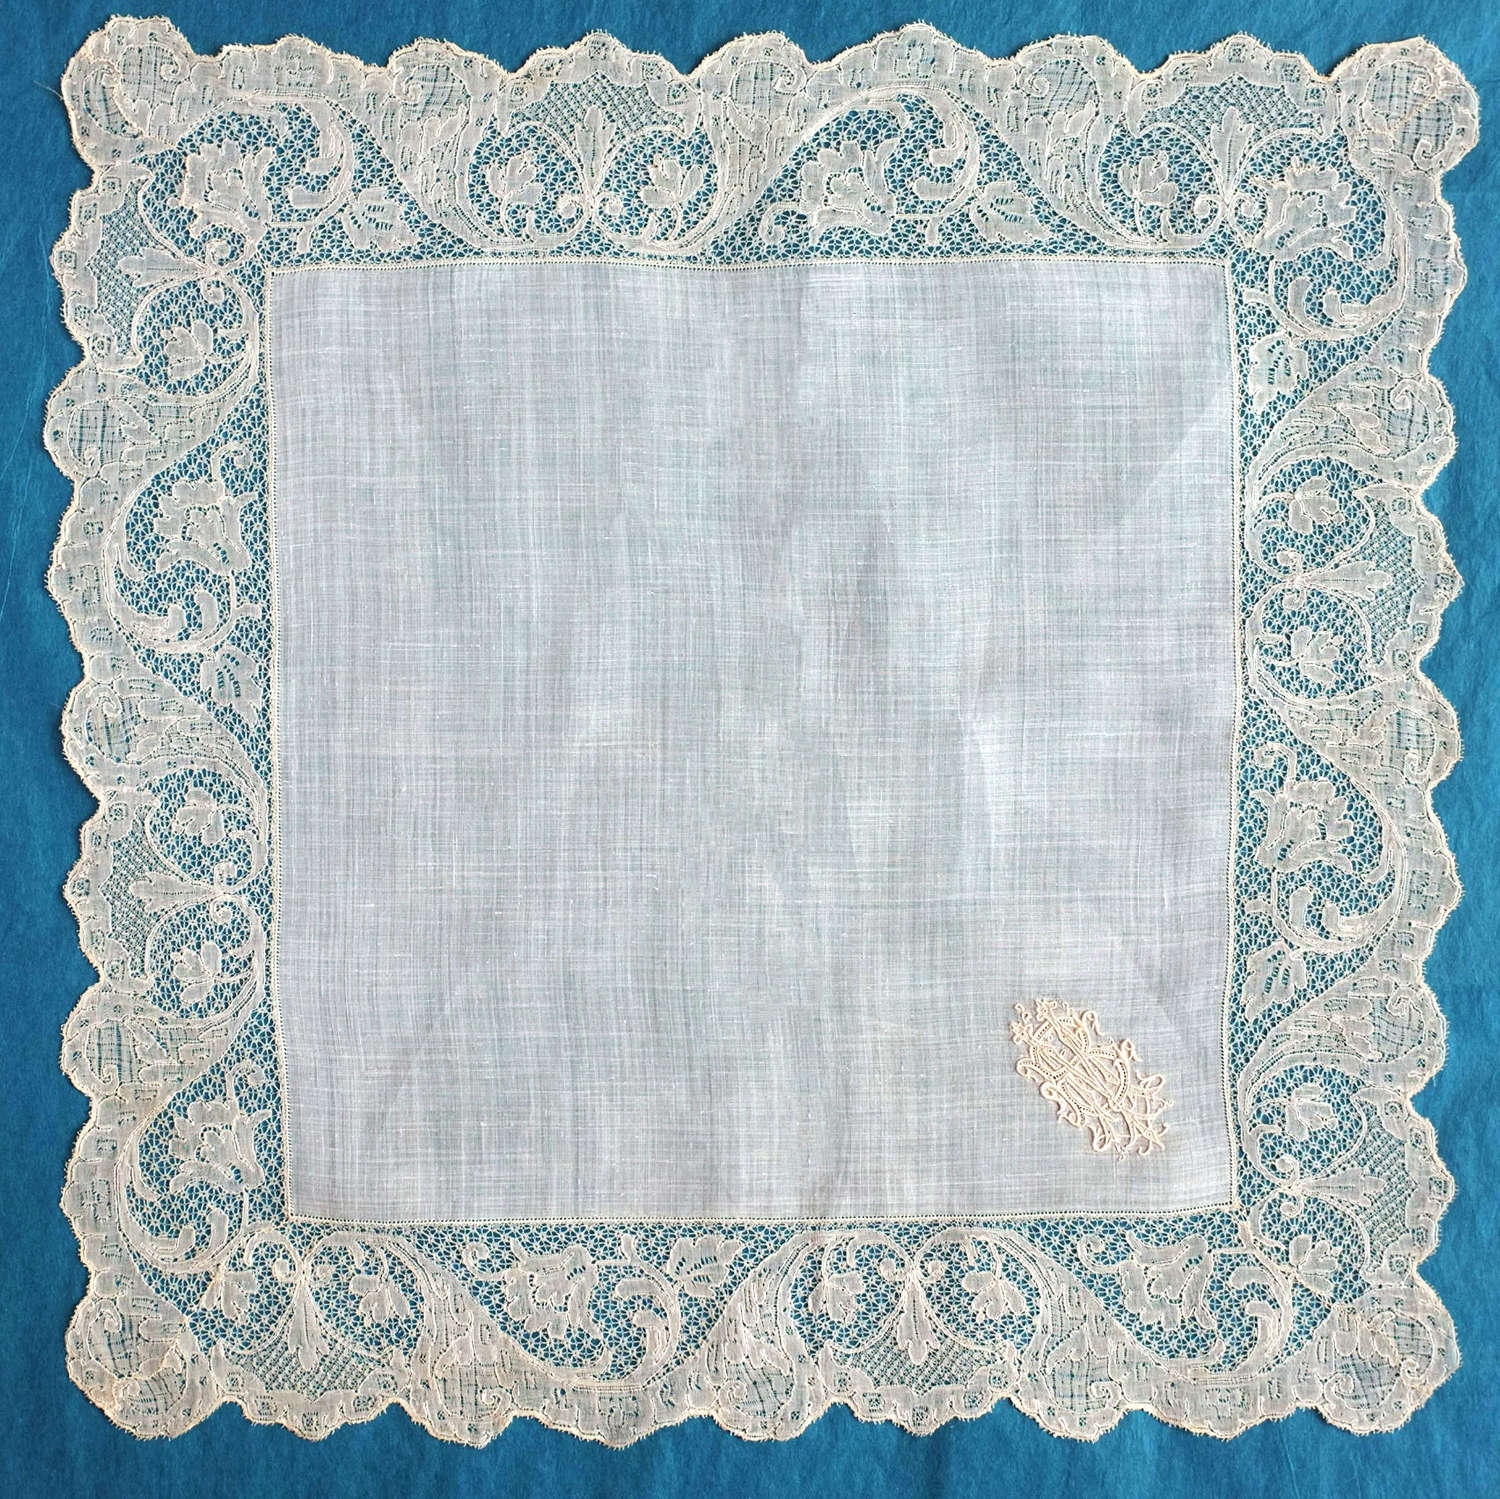 Antique 19th C Handkerchief with 18th C Mechlin Lace Border